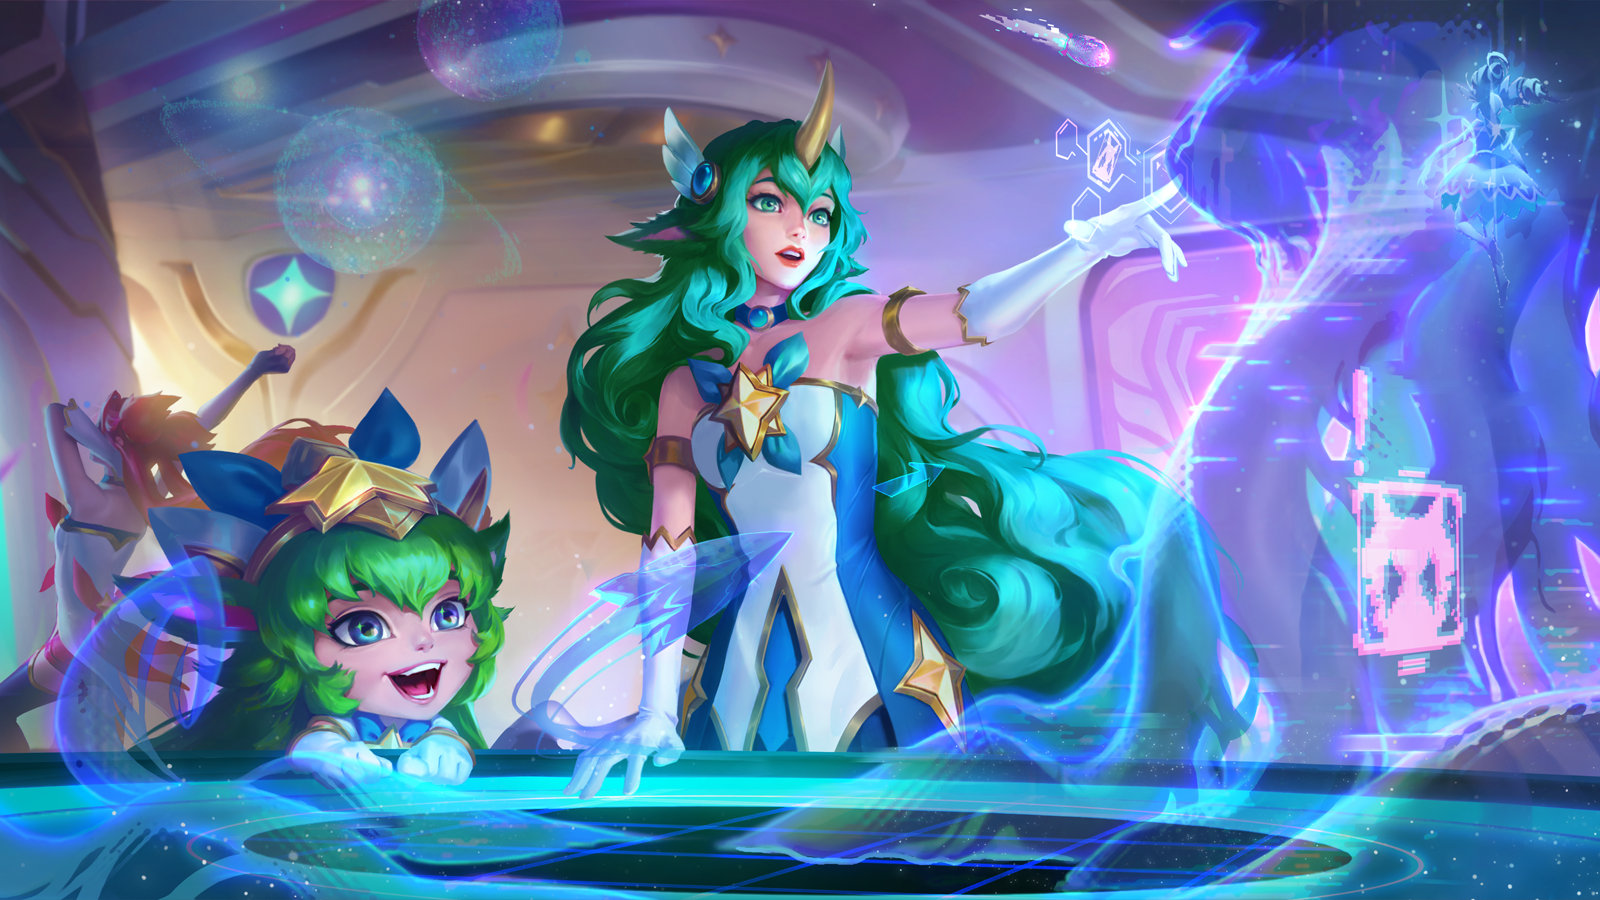 Anime 1600x900 League of Legends Star Guardian video games video game art video game characters